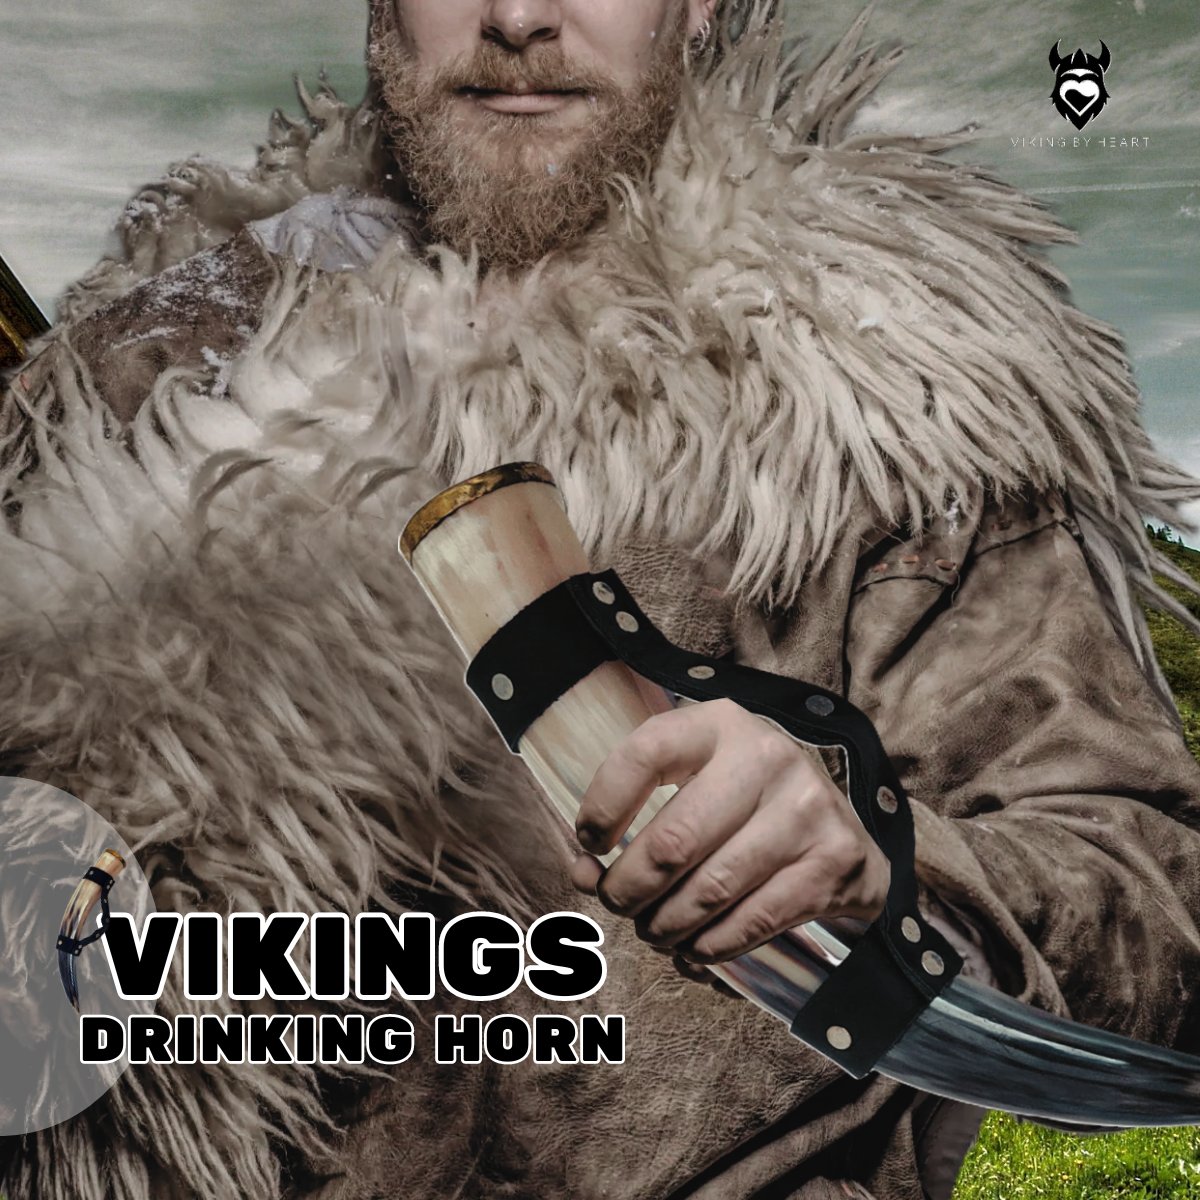 ⚔️ Authentic viking drinking horn with brass rim & leather strap - the perfect gift for christmas, birthdays, and weddings. Ideal for men, women, husbands, and boyfriends. #vikingbyheart #drinkinghorn #vikinghorn 🛒 𝐁𝐮𝐲 𝐍𝐨𝐰 » amazon.co.uk/dp/B09RJLPB42